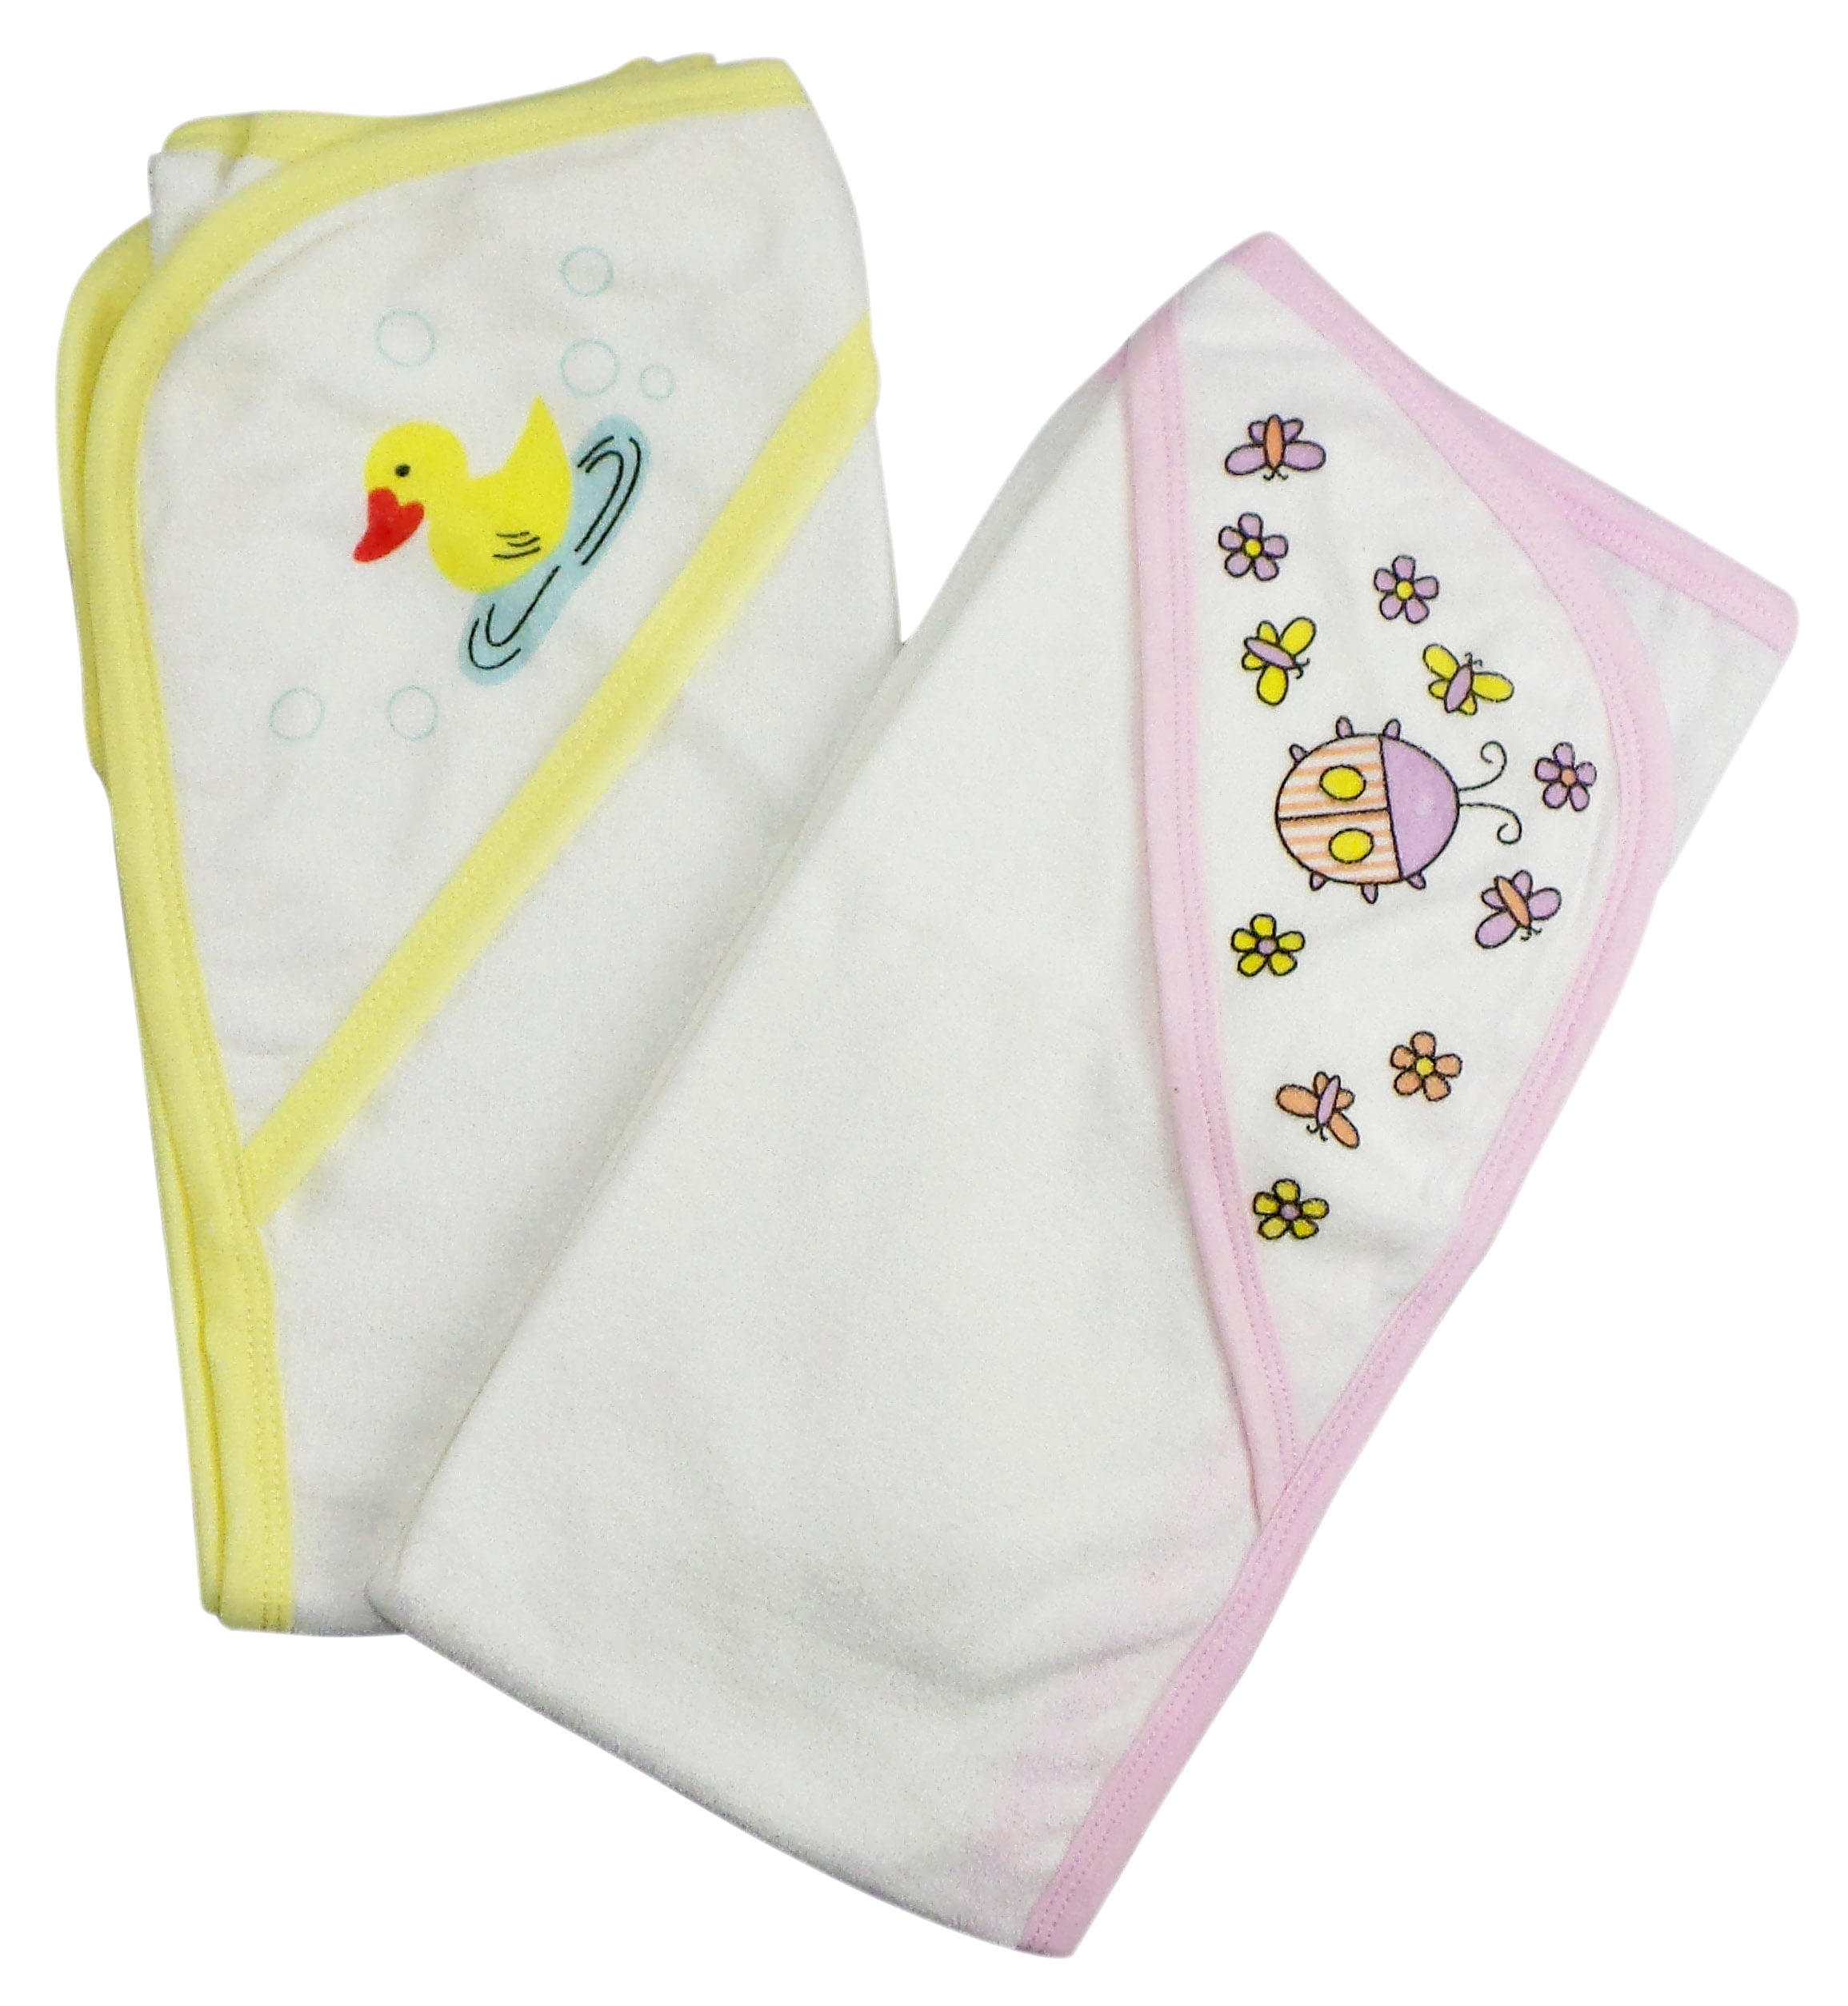 021-pink-021-yellow Infant Hooded Bath Towel, Pink & Yellow - Pack Of 2